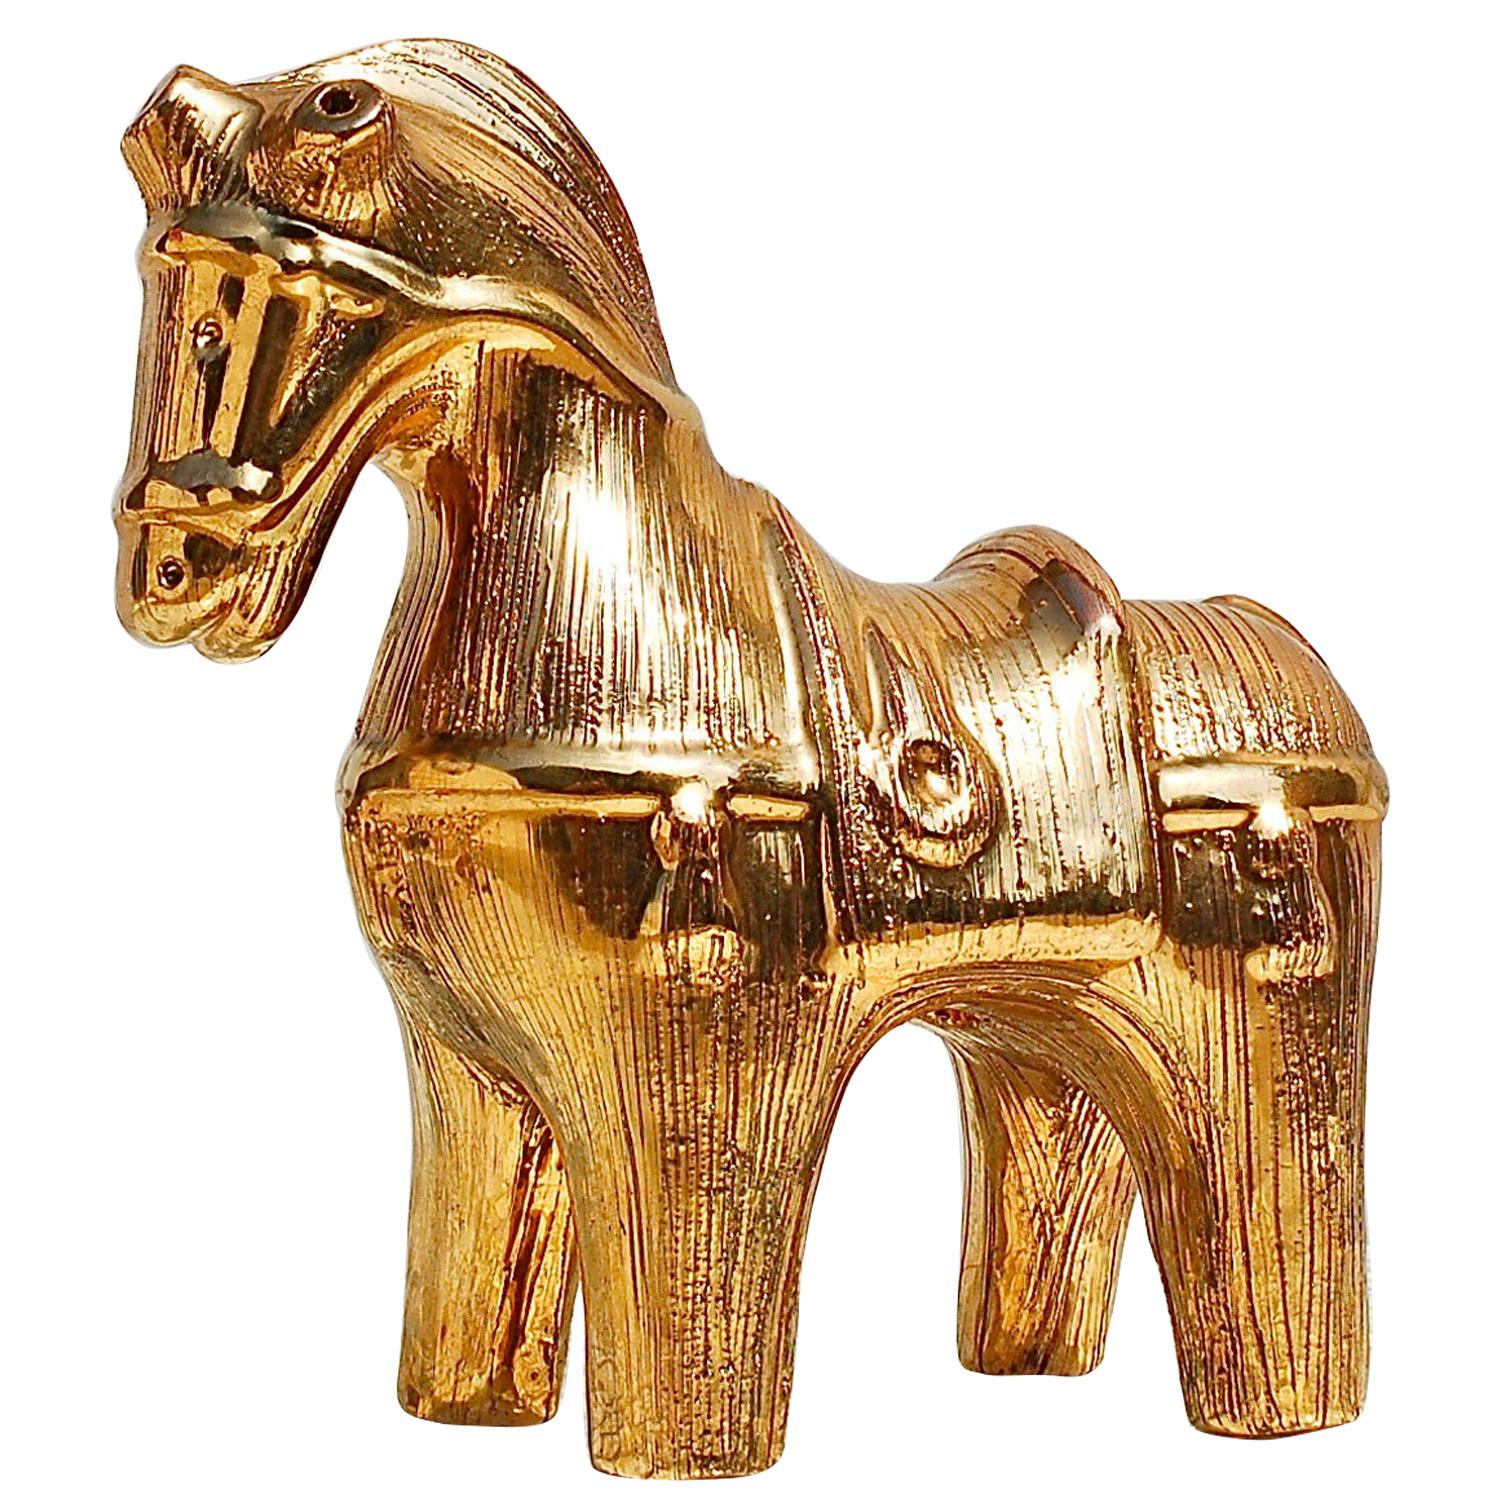 Ceramic Horse Sculpture by Bitossi in Gilt Glaze, Italy, 1960s For Sale